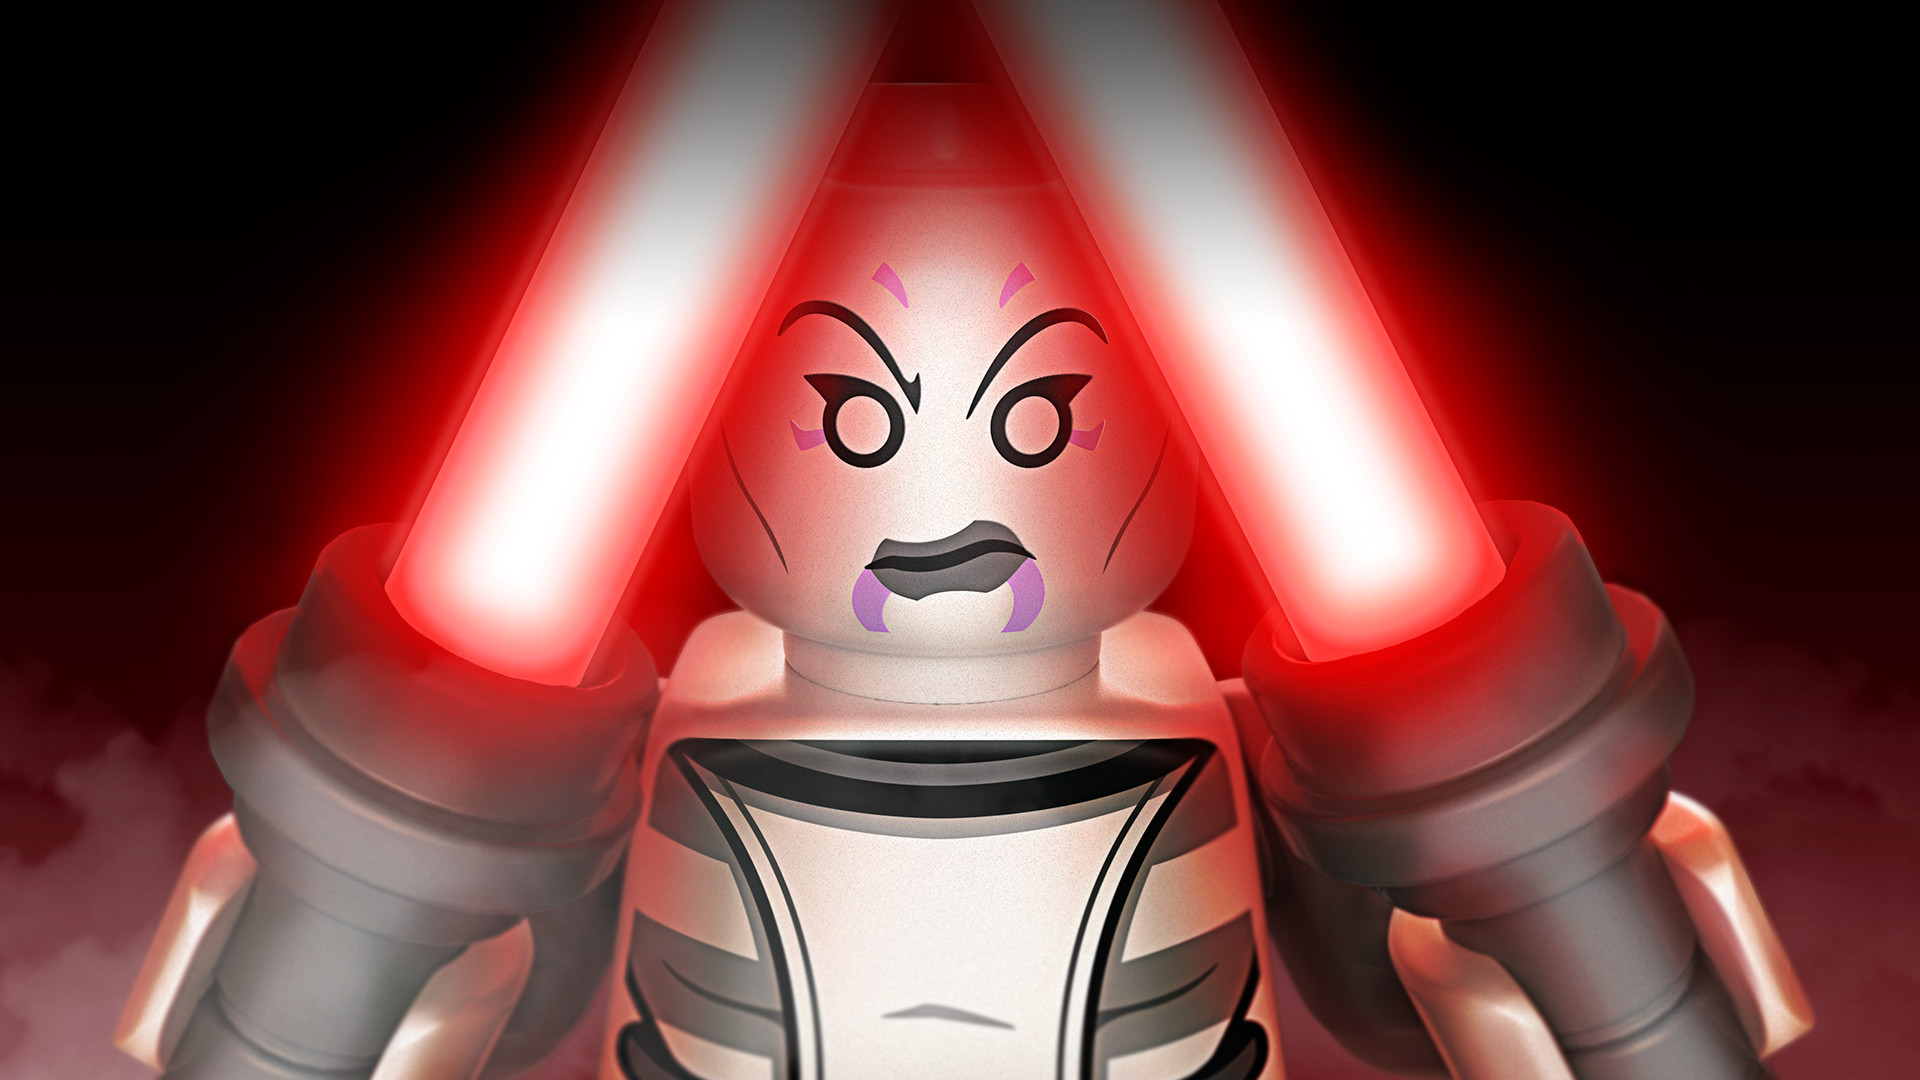 [$ 1.68] LEGO Star Wars: The Force Awakens - The Clone Wars Character Pack DLC Steam CD Key